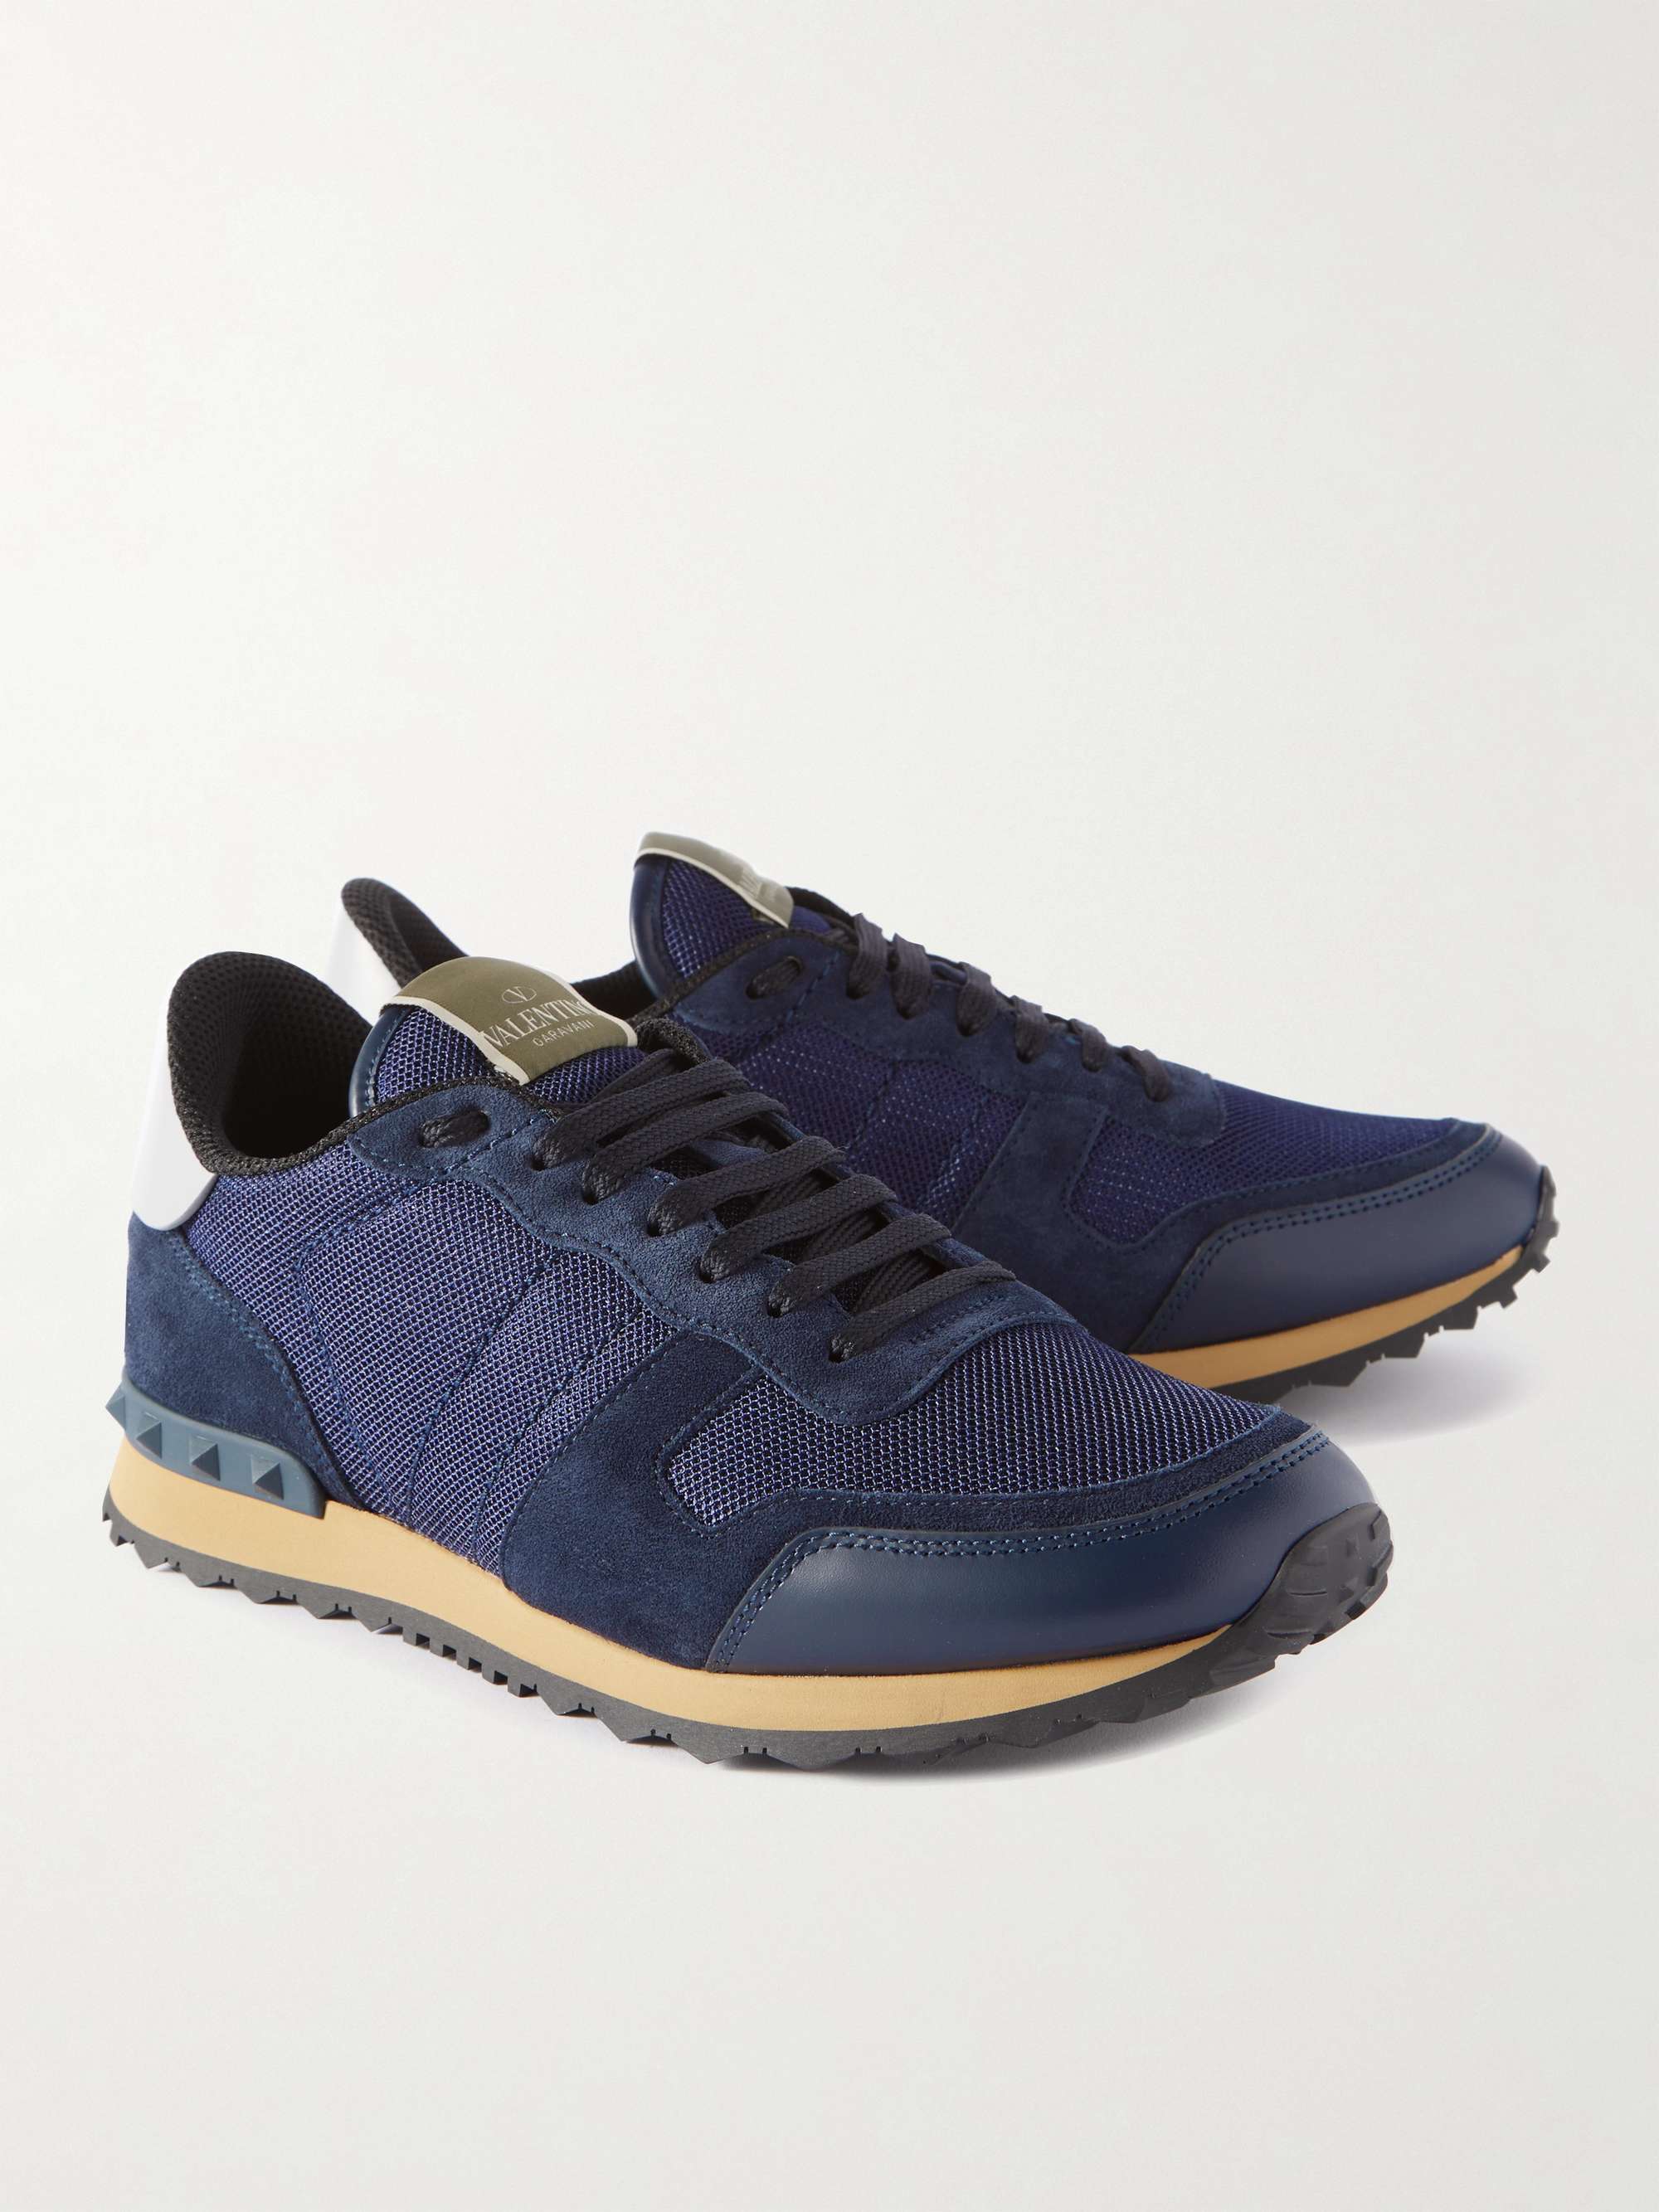 VALENTINO Valentino Garavani Rockrunner Leather-Trimmed Suede and Mesh Sneakers